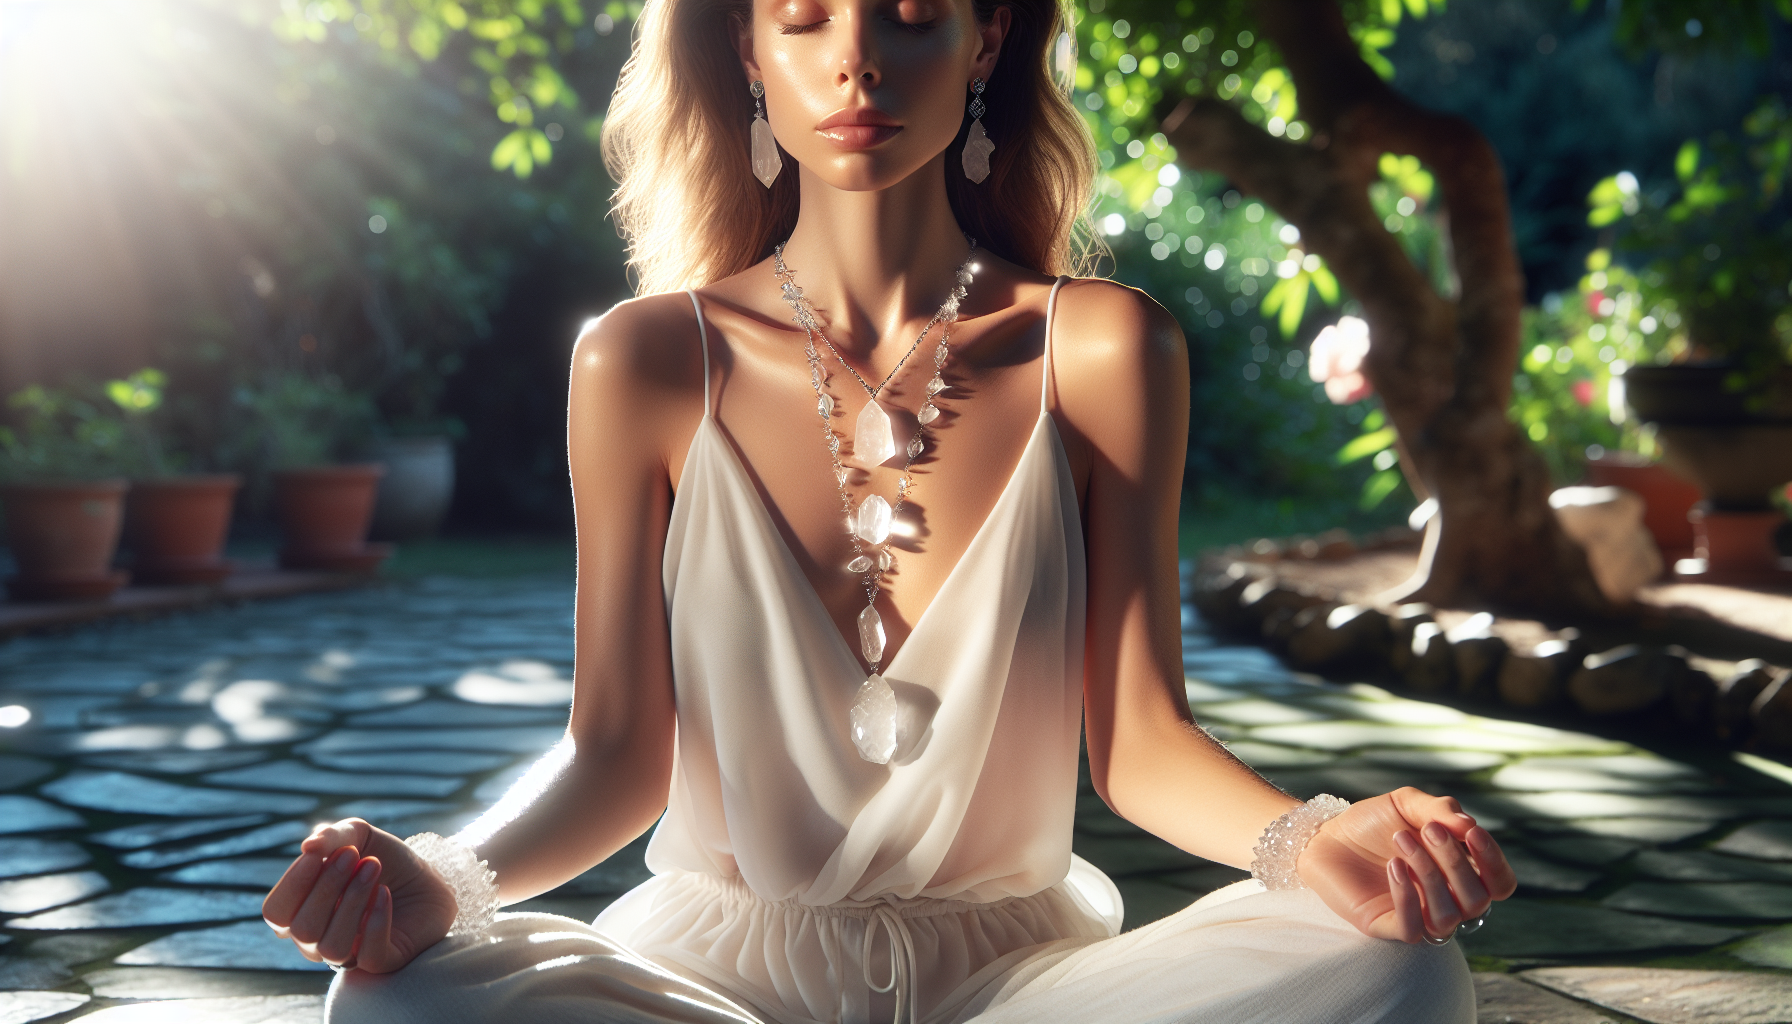 Person meditating with clear quartz jewelry